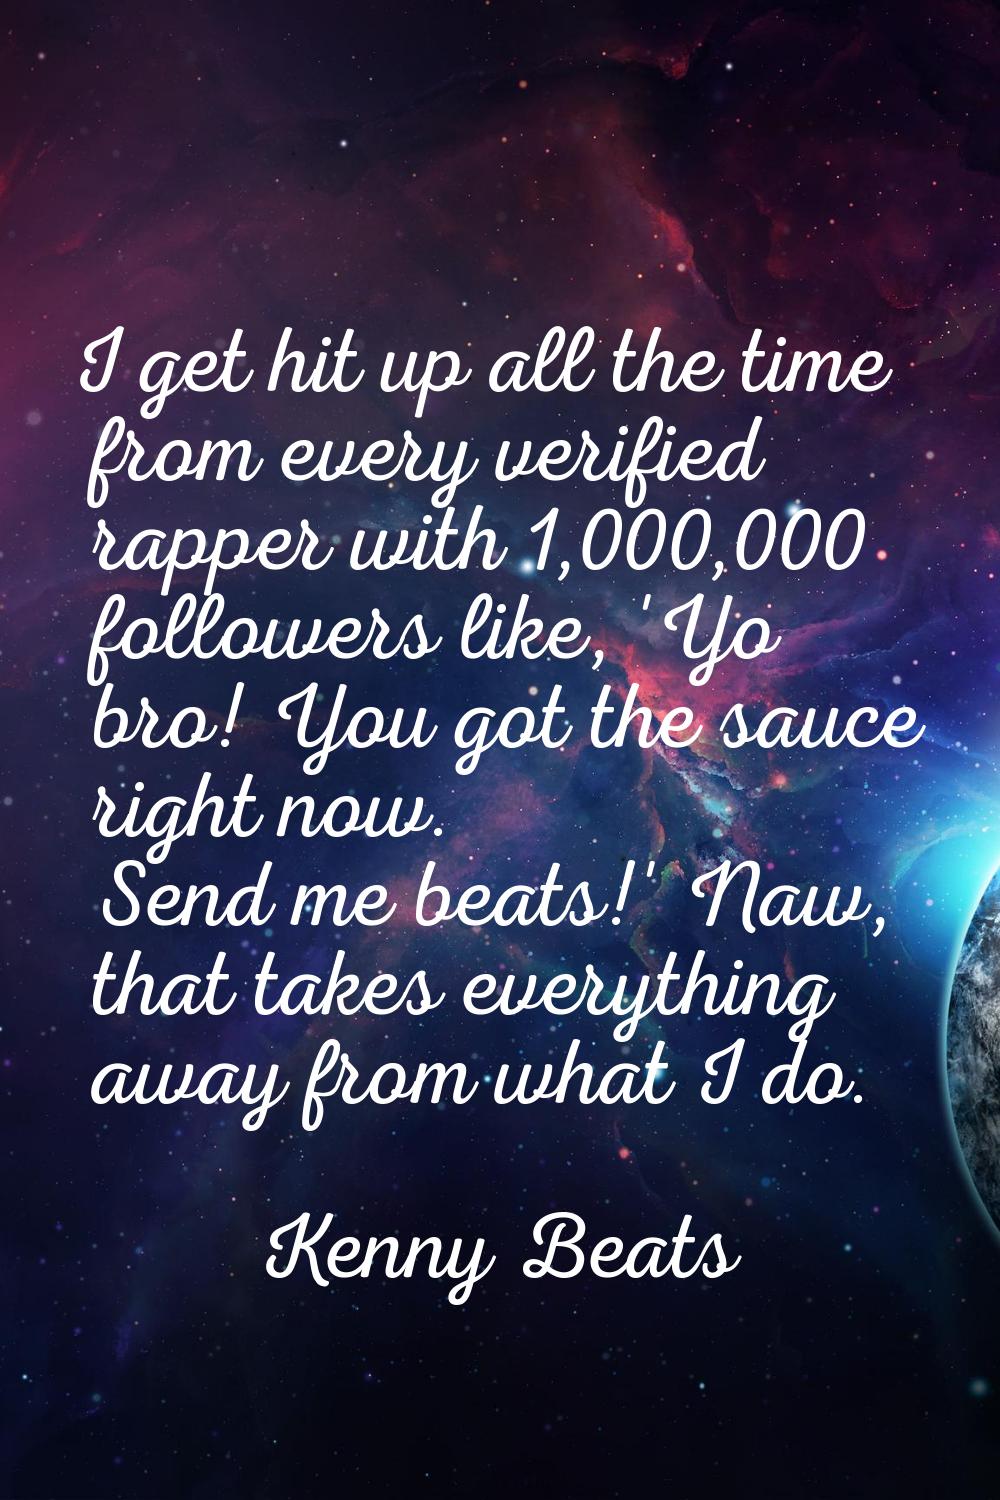 I get hit up all the time from every verified rapper with 1,000,000 followers like, 'Yo bro! You go